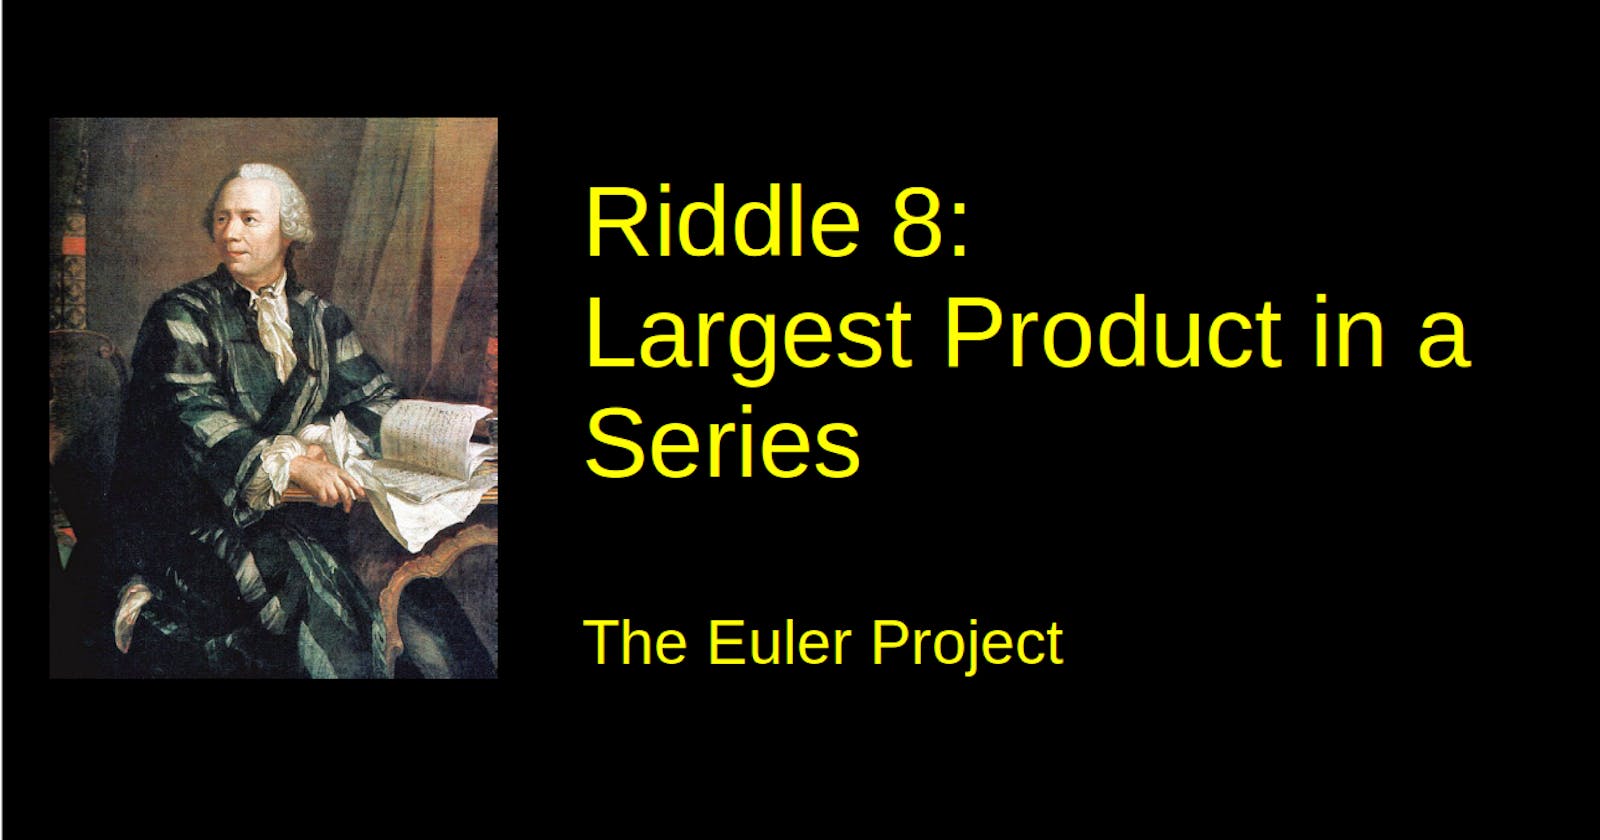 Riddle 8: Largest Product in A Series